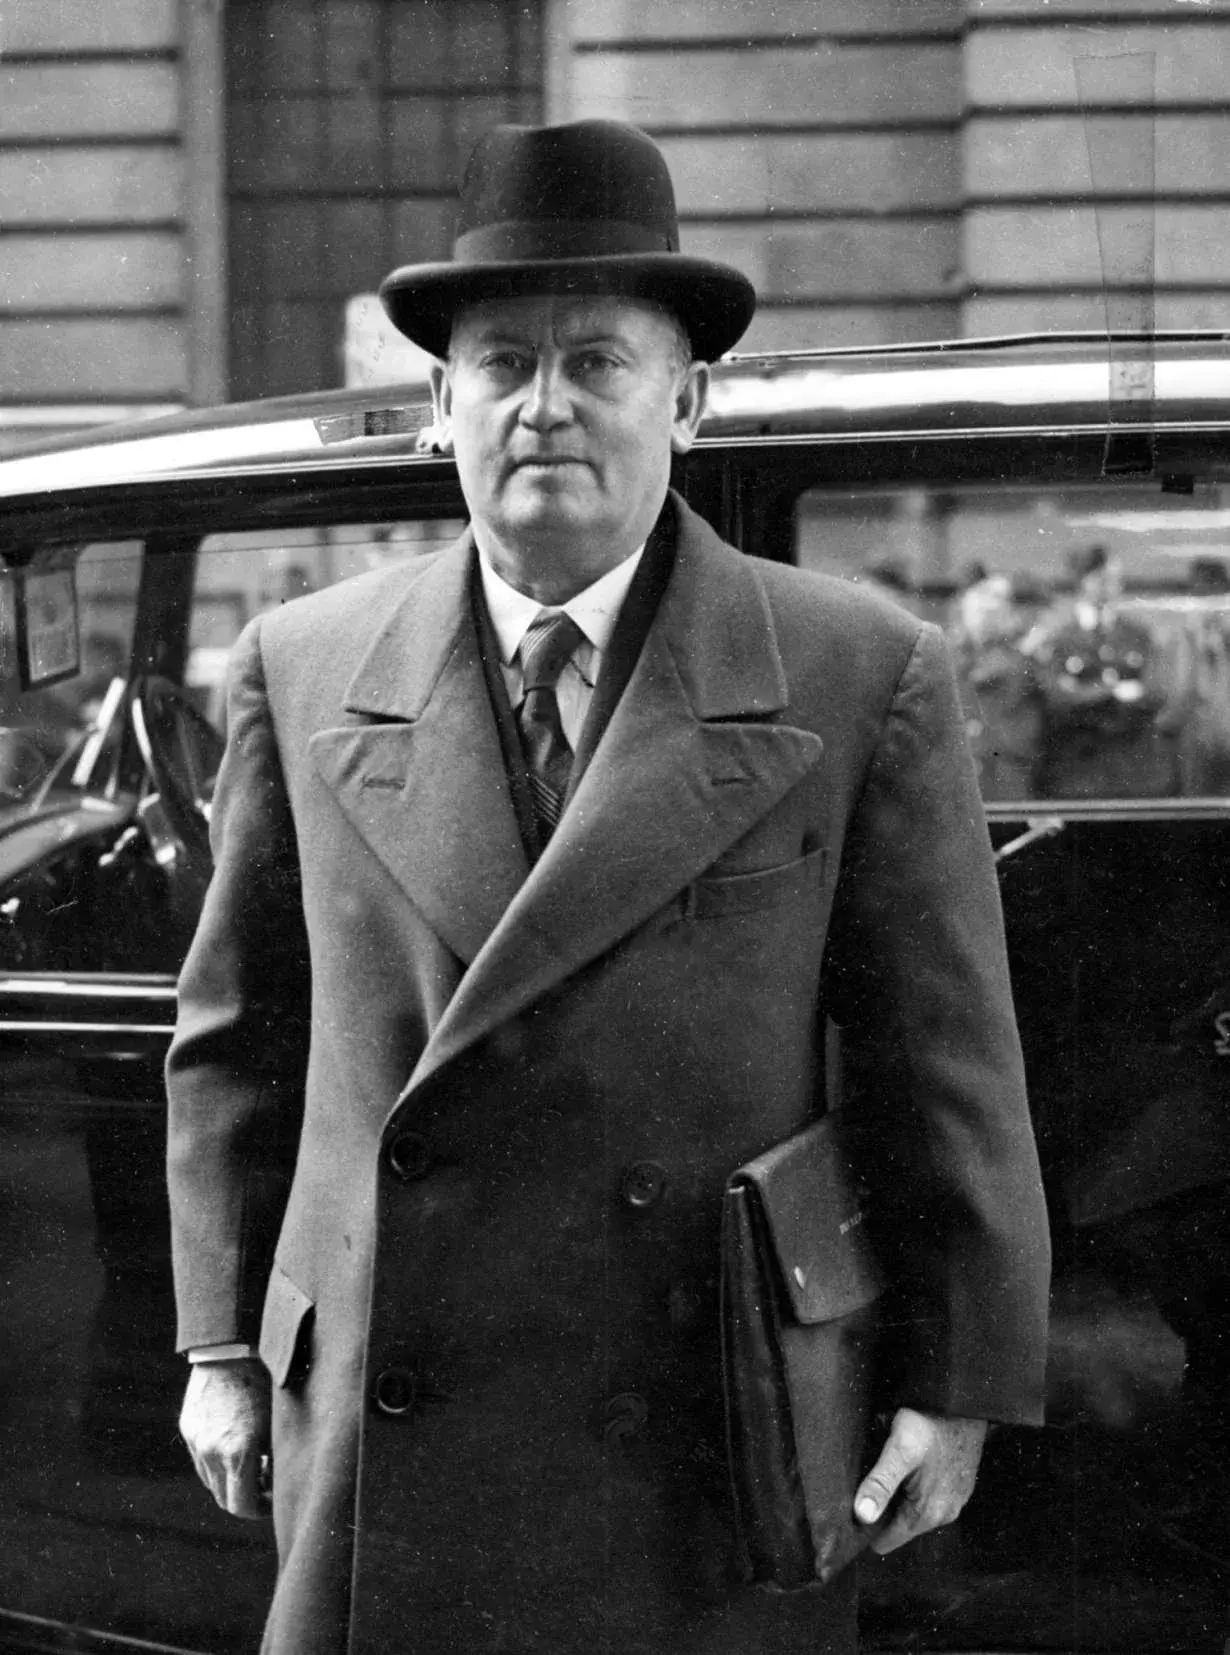 Frank Forde wearing a hat and coat and holding a leather satchel under his arm as he walks into a building. 